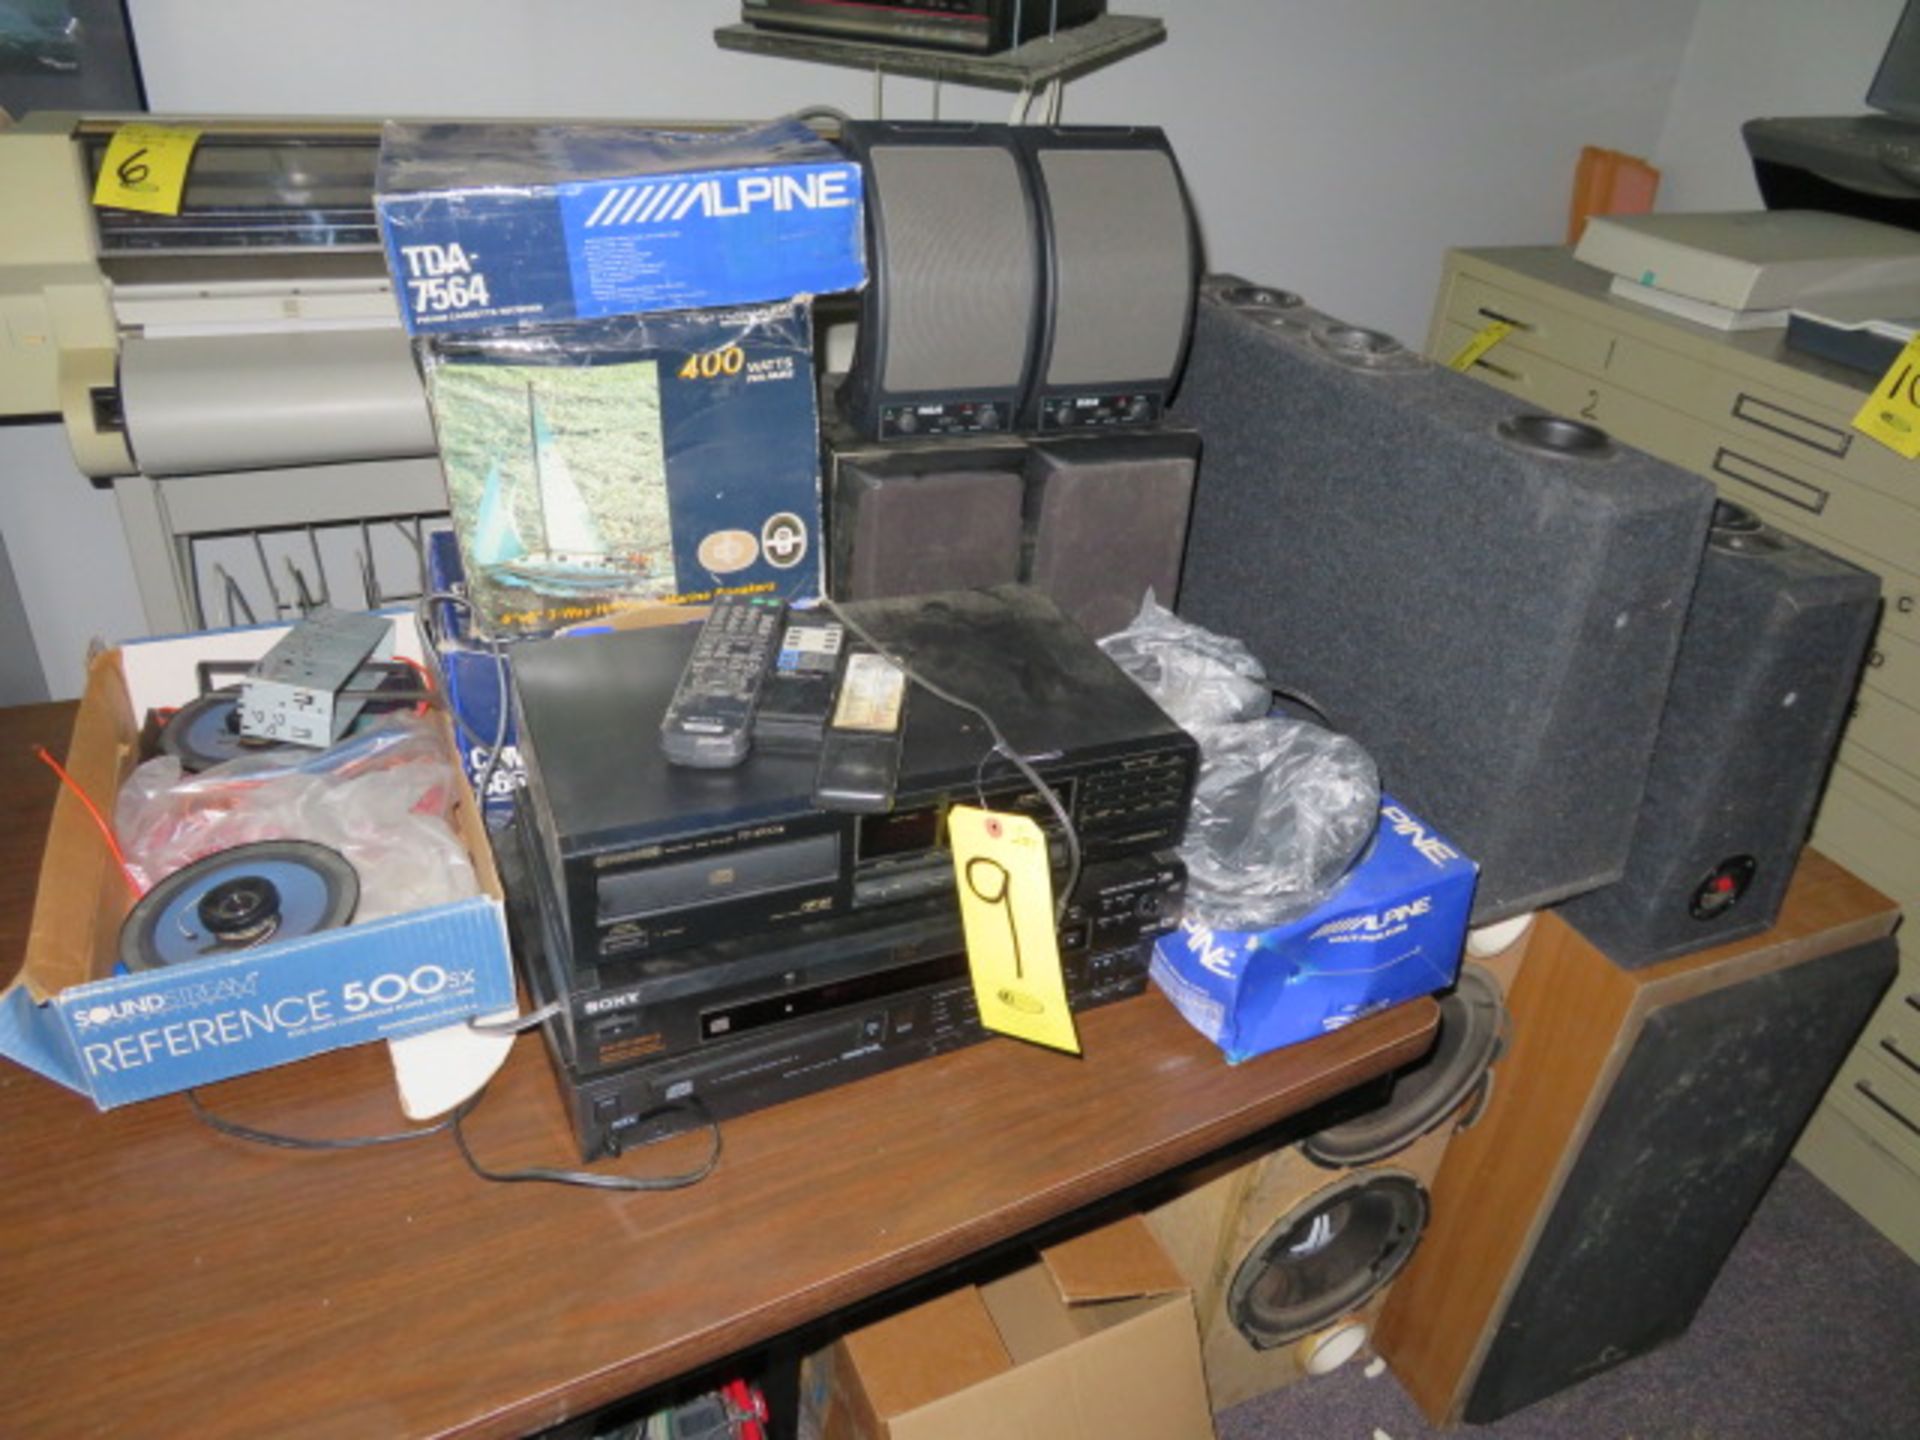 ASSORTED SPEAKERS, RECEIVER/CD PLAYER